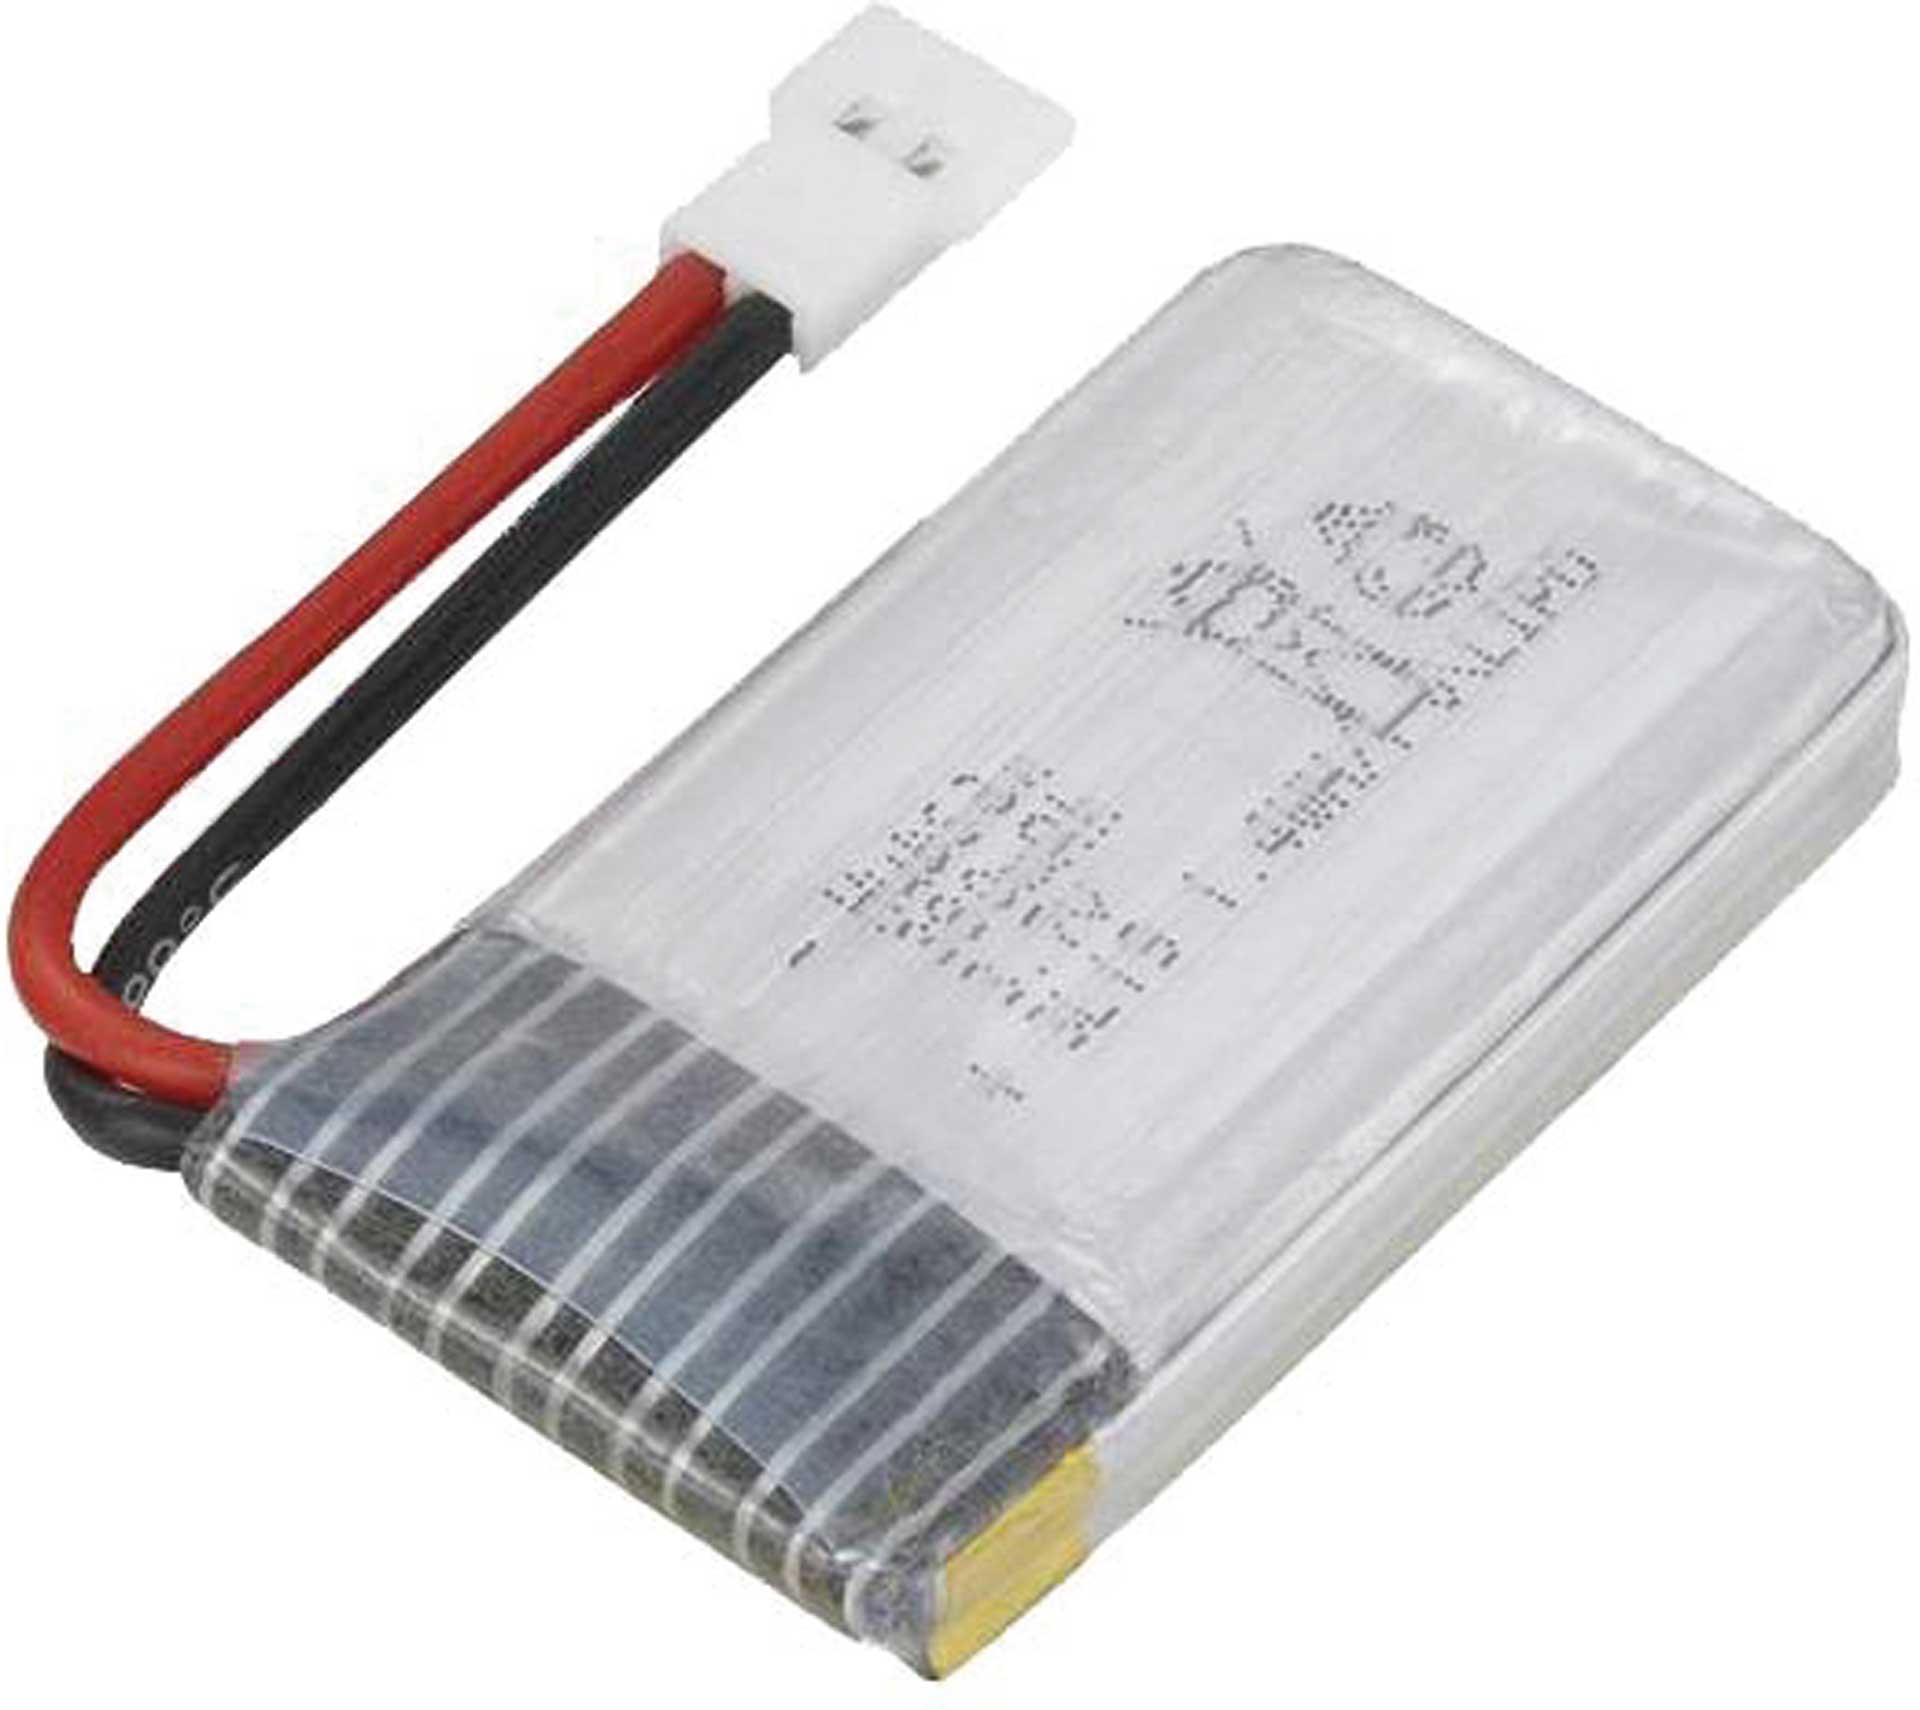 DRIVE & FLY MODELS Replacement battery DF-100 Helicopter 3,7V 400mah